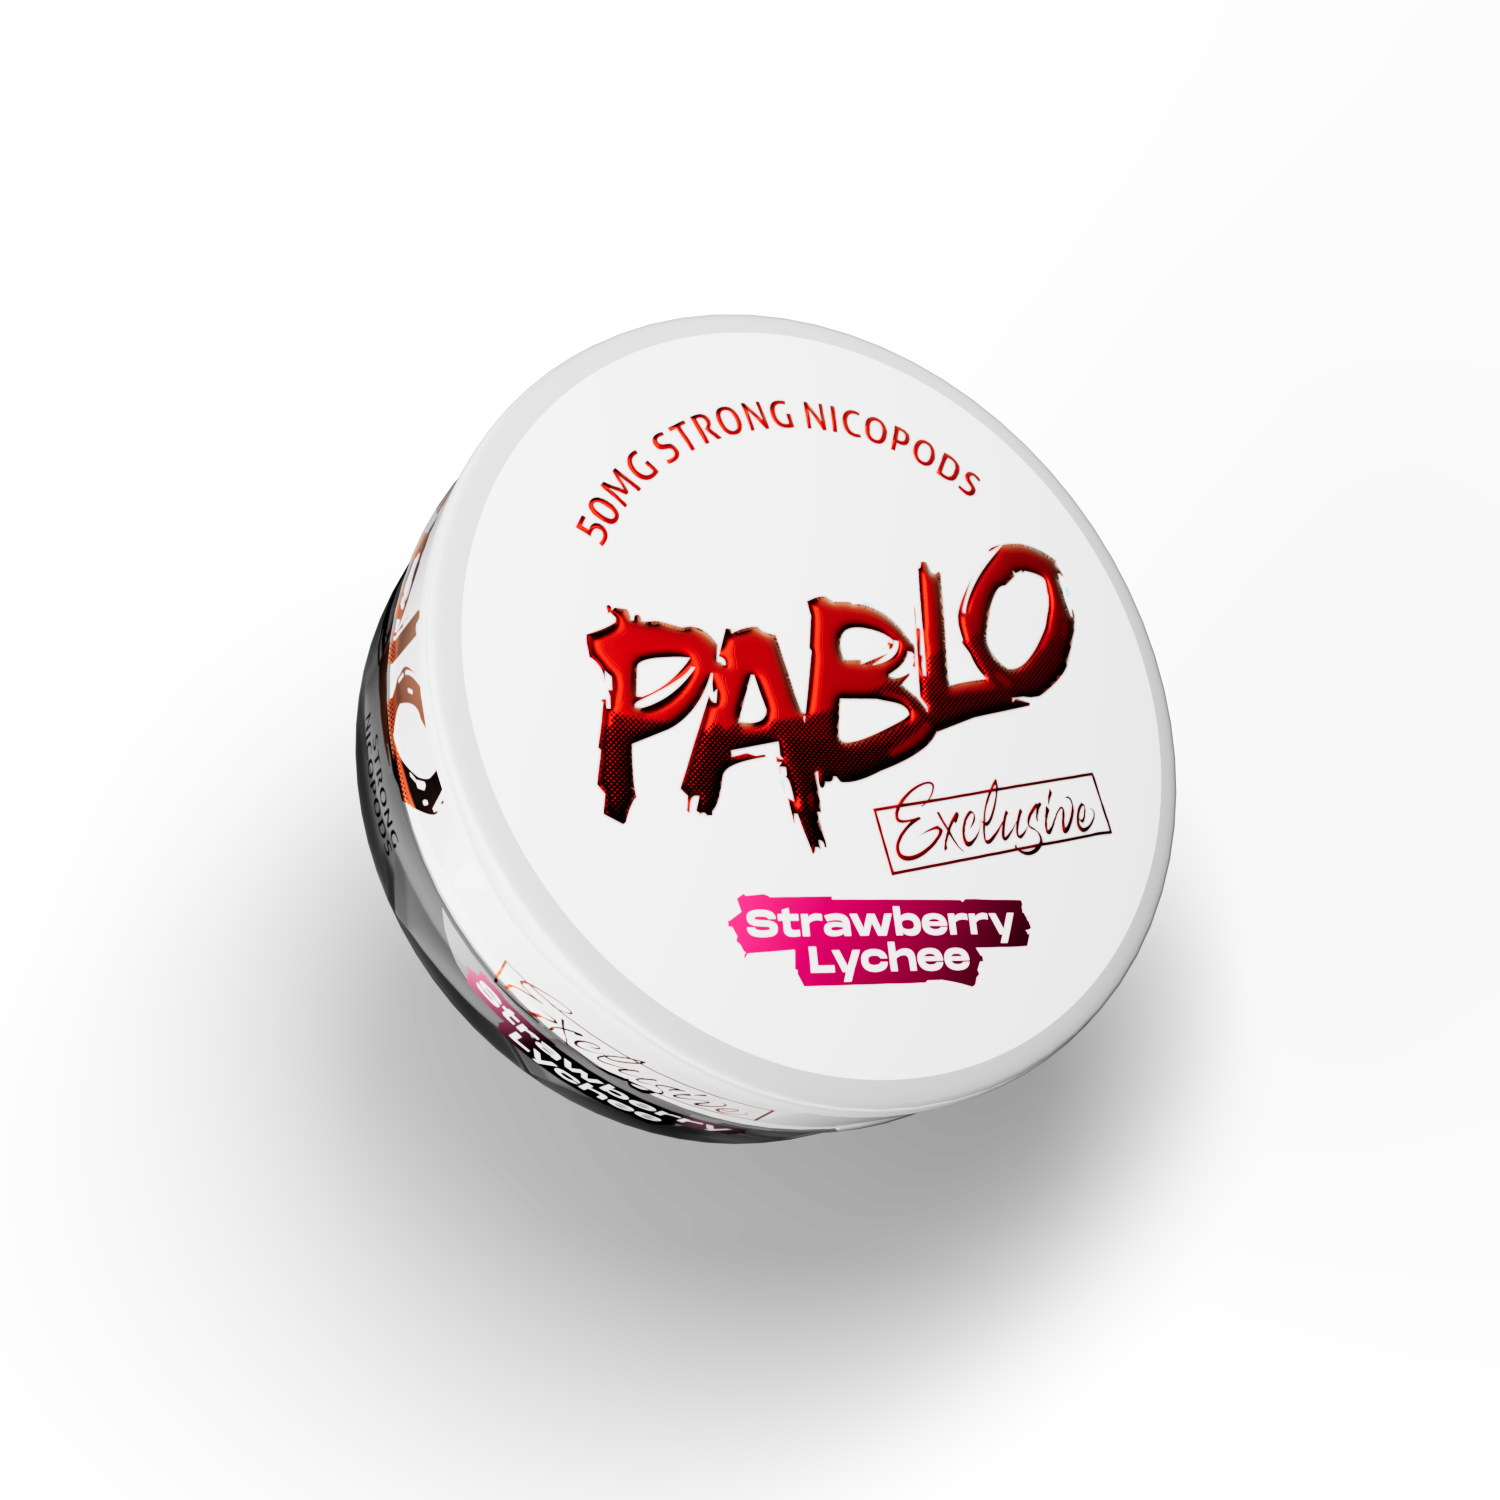 Pablo_Excl_StrawberryLychee_2